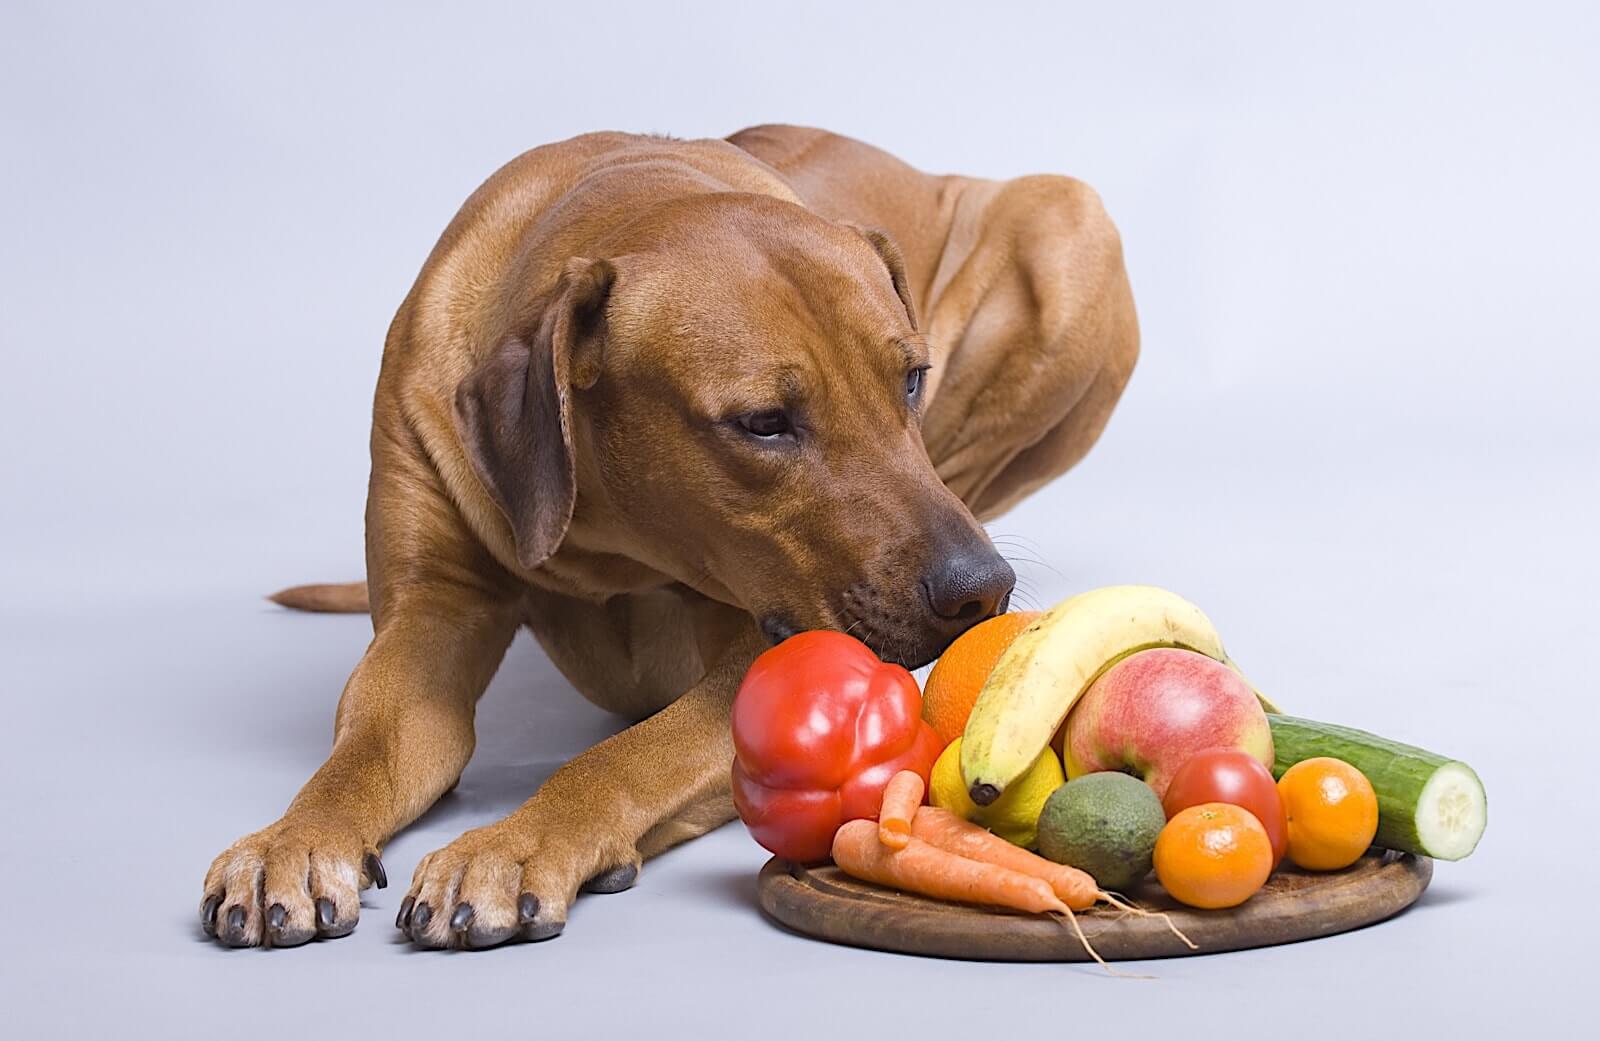 What is the healthiest fruit for dogs?